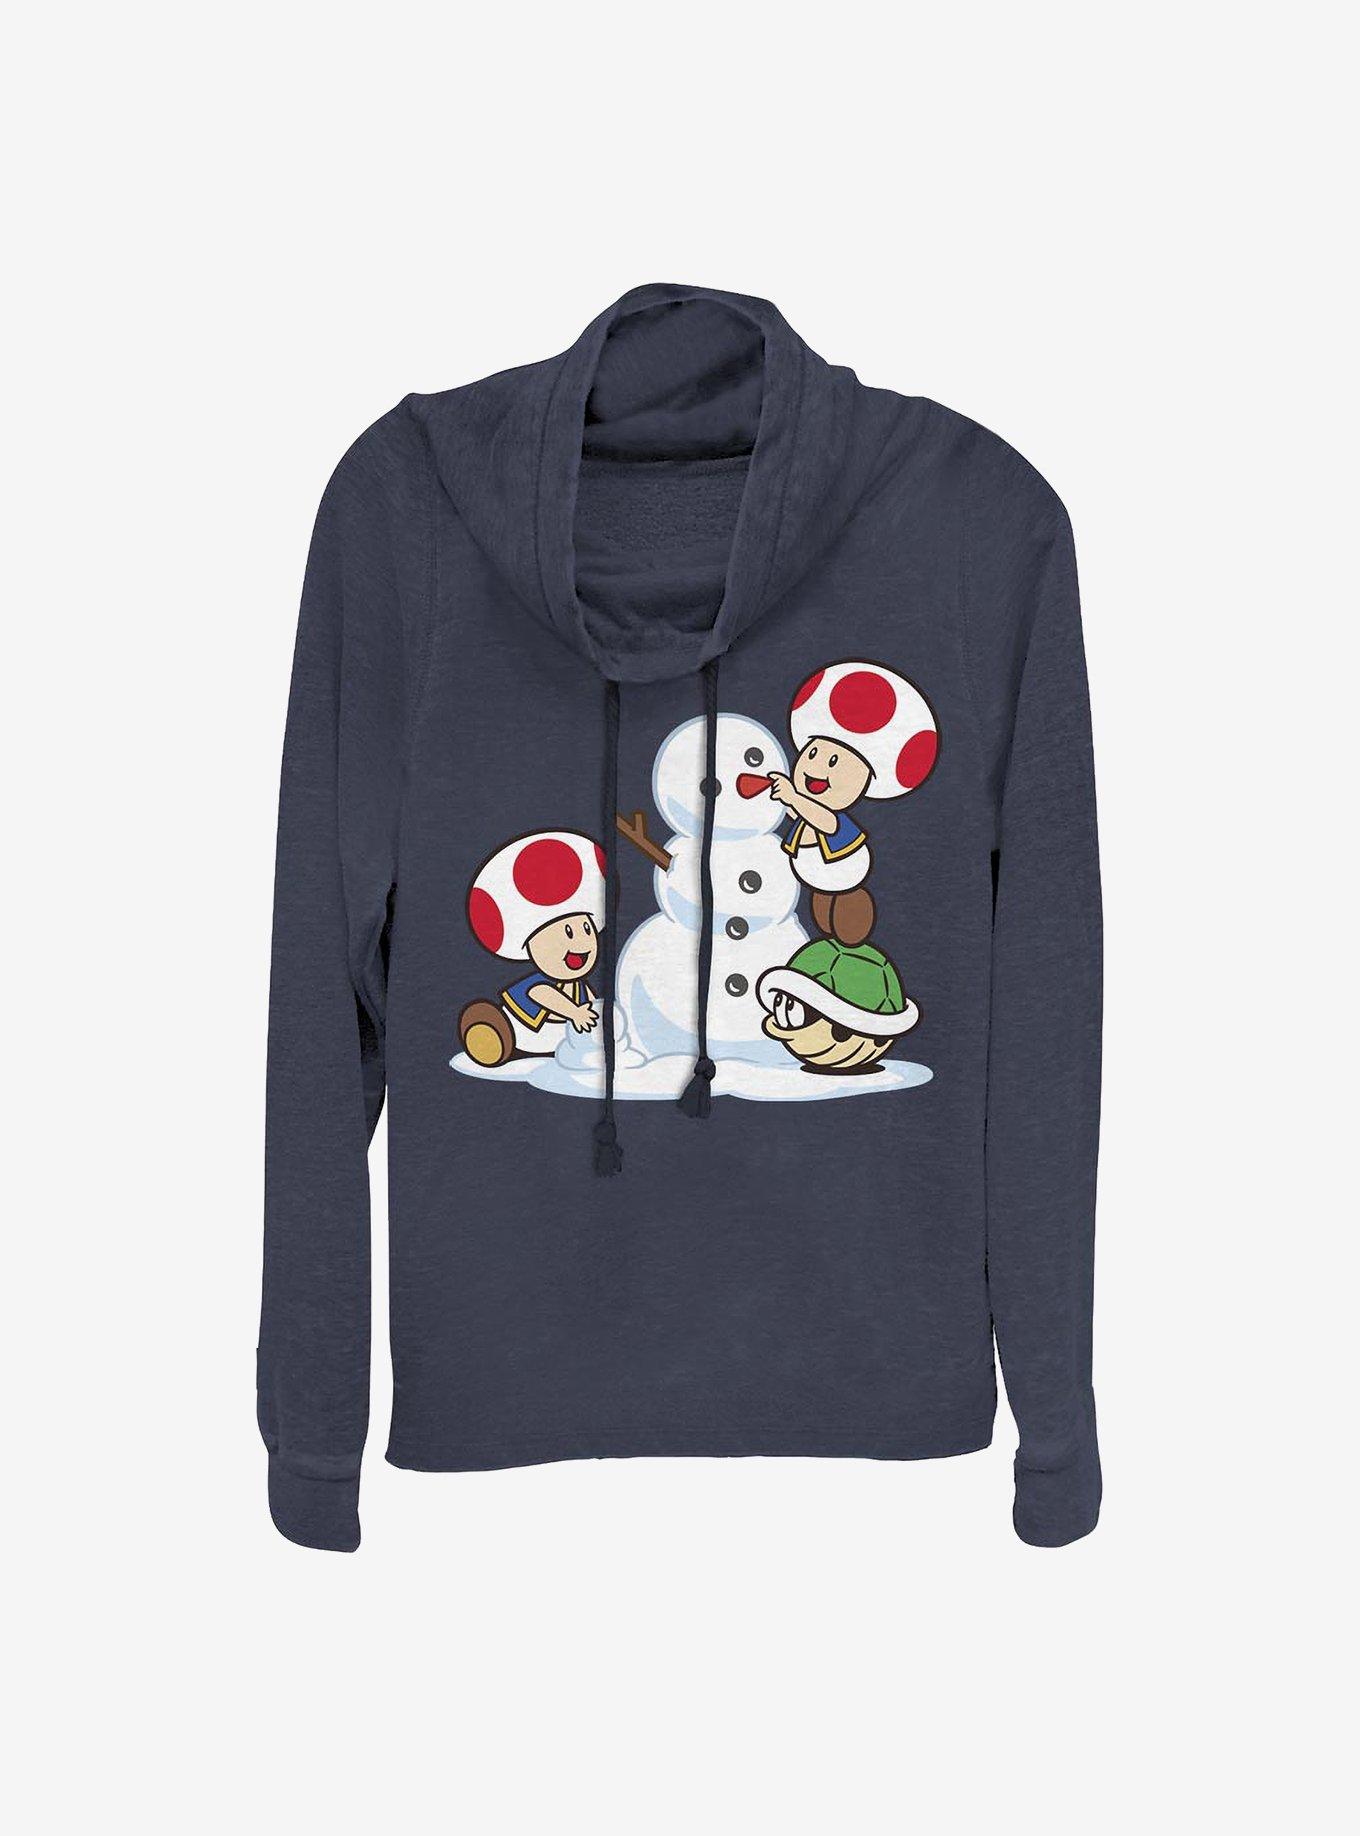 Super Mario Frosty Toad Holiday Cowl Neck Long-Sleeve Girls Top, NAVY, hi-res